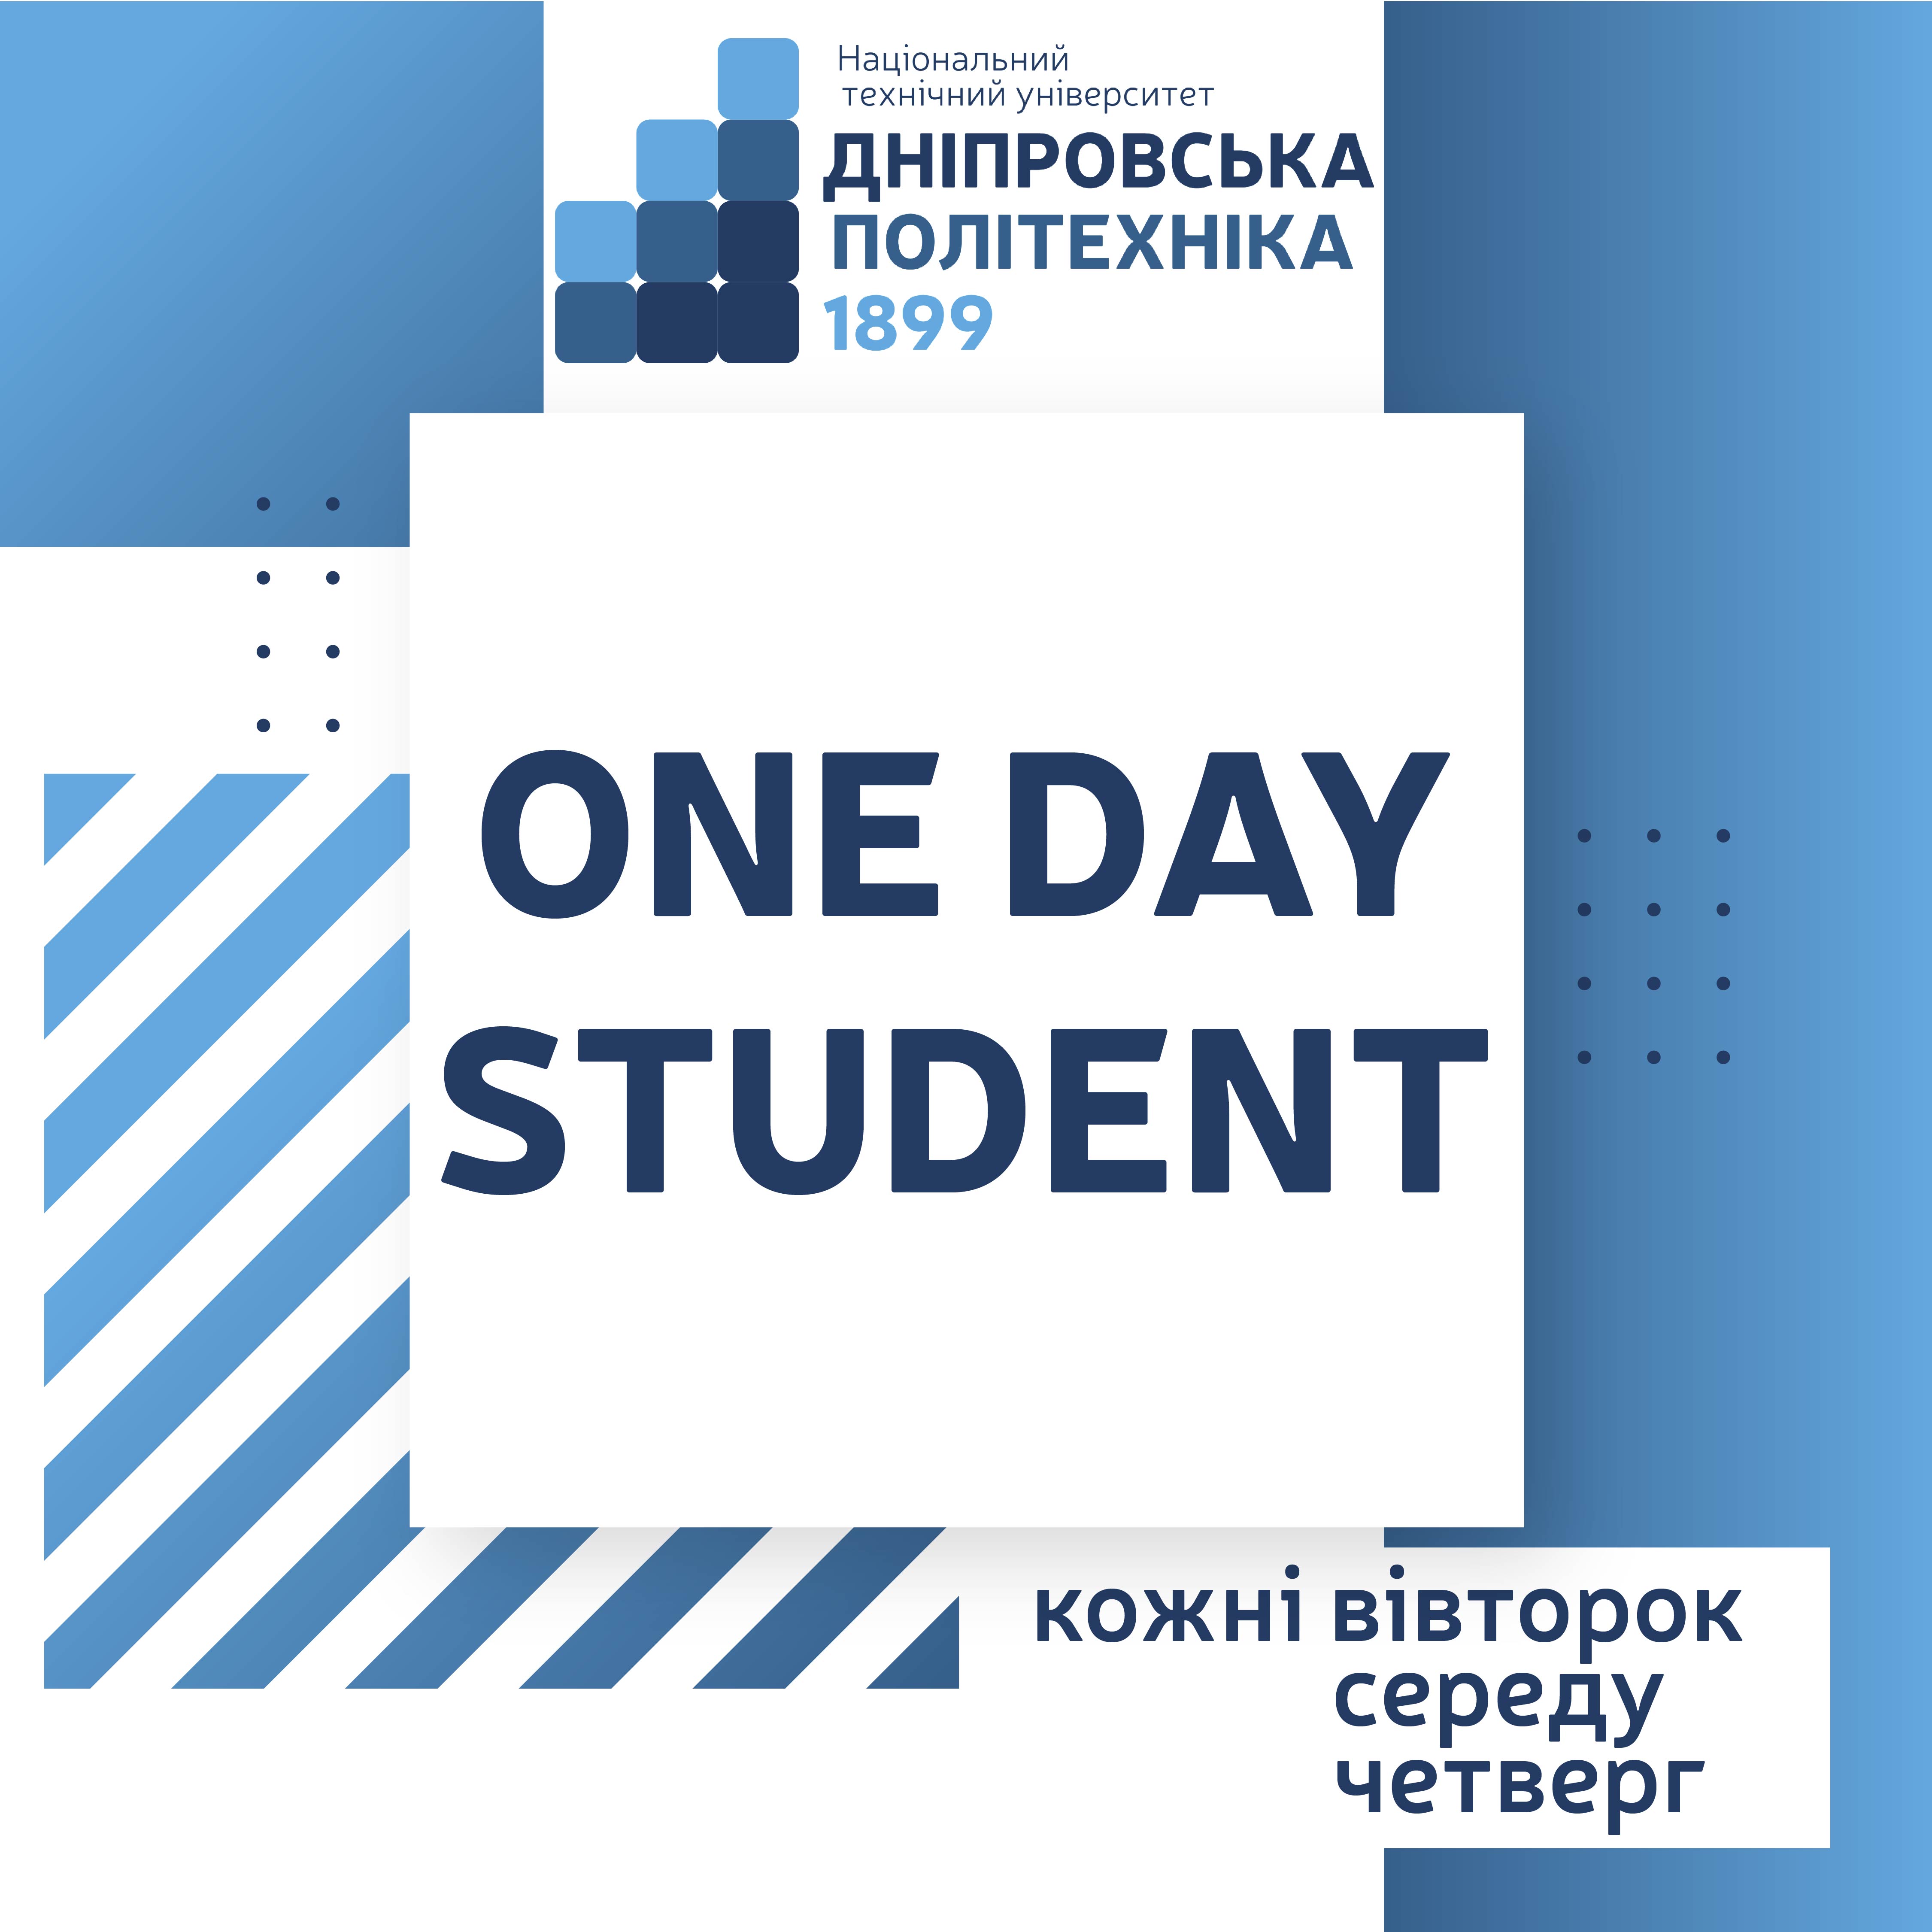 One Day Student